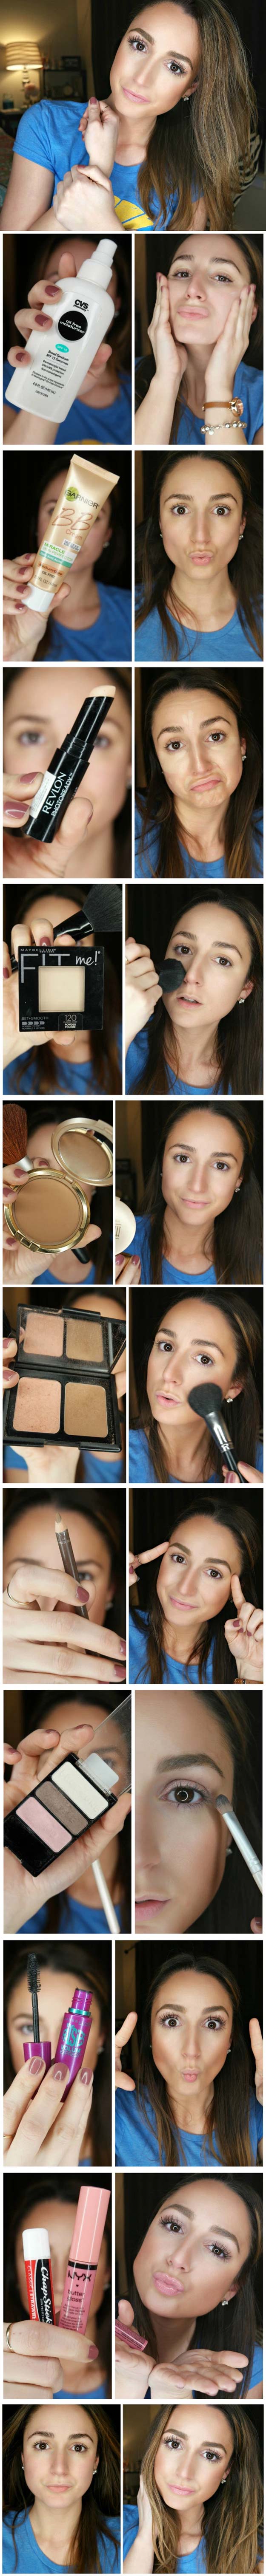 Best Makeup Tutorials for Teens -5 Minute Everyday Makeup Routine - Easy Makeup Ideas for Beginners - Step by Step Tutorials for Foundation, Eye Shadow, Lipstick, Cheeks, Contour, Eyebrows and Eyes - Awesome Makeup Hacks and Tips for Simple DIY Beauty - Day and Evening Looks 